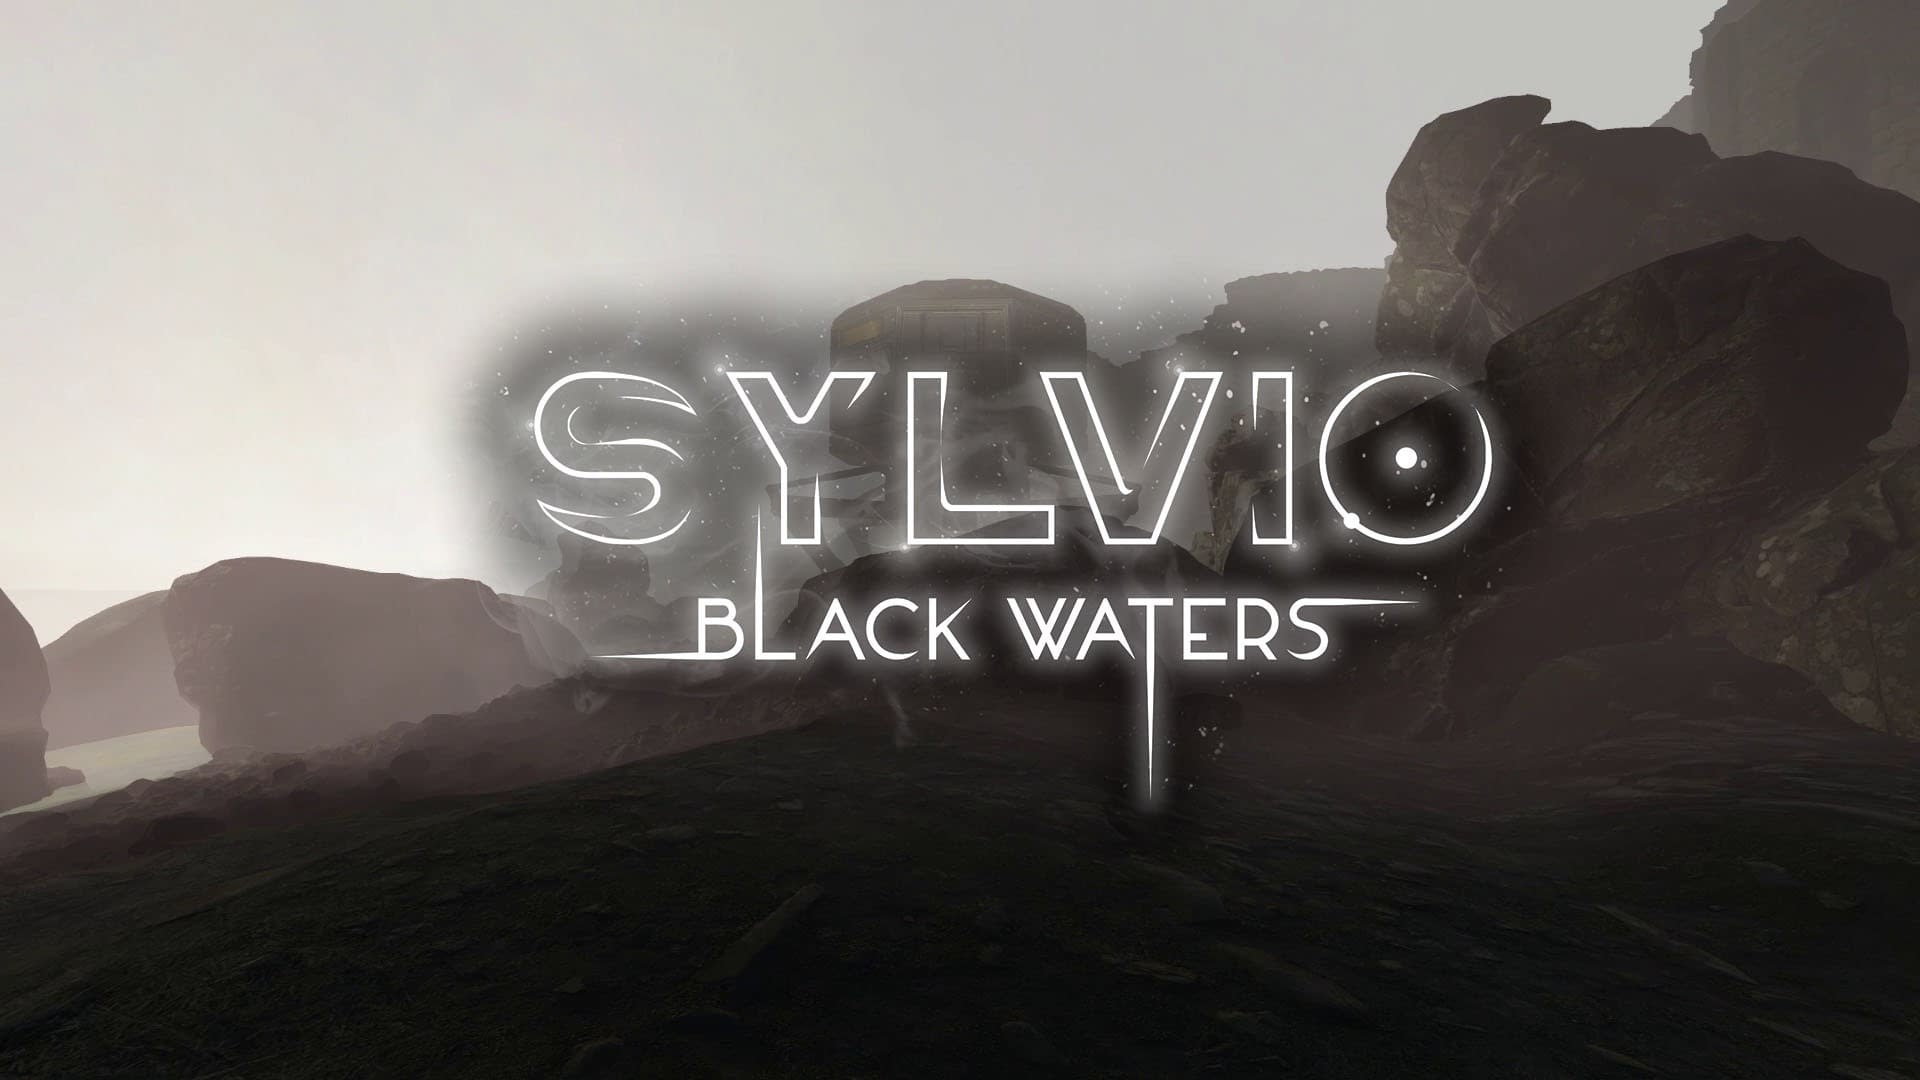 First Party Horror Game Sylvio: Black Waters Announced